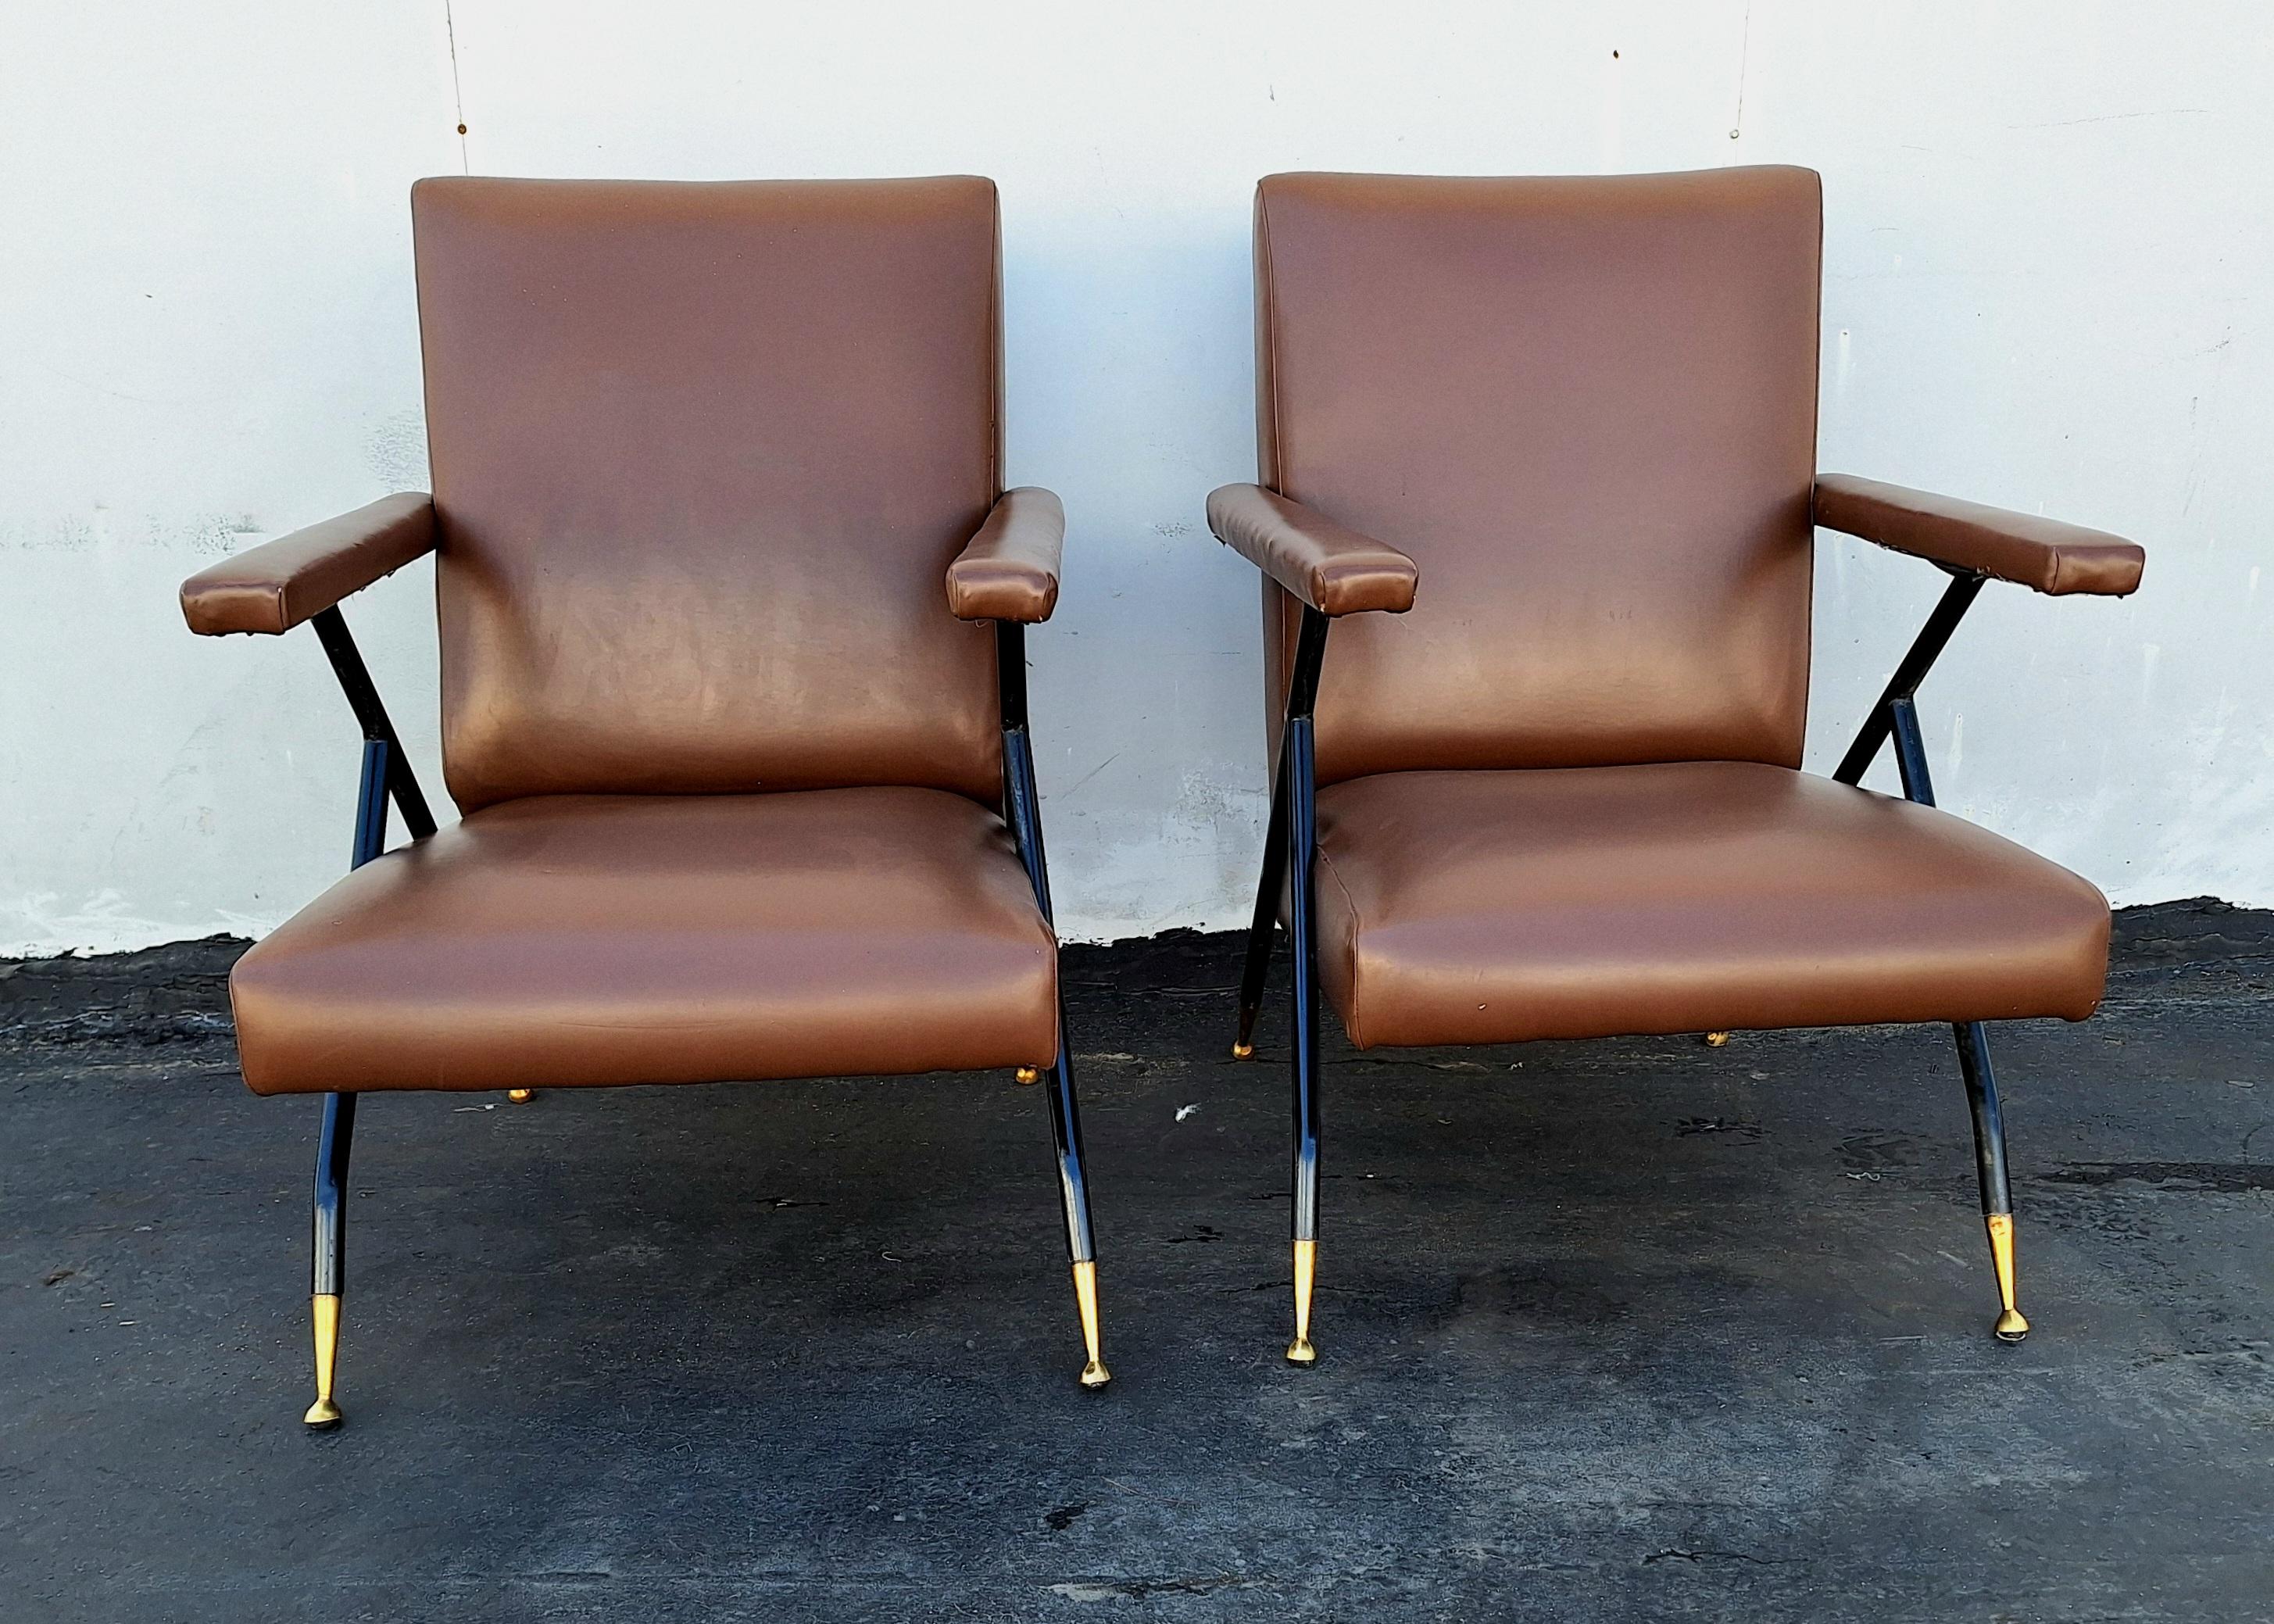 Italian mid century chairs ,metal frame  brass bout legs  vinyl upholstery in original condition .Chairs are comfortable and typical  mid century Italian design .  